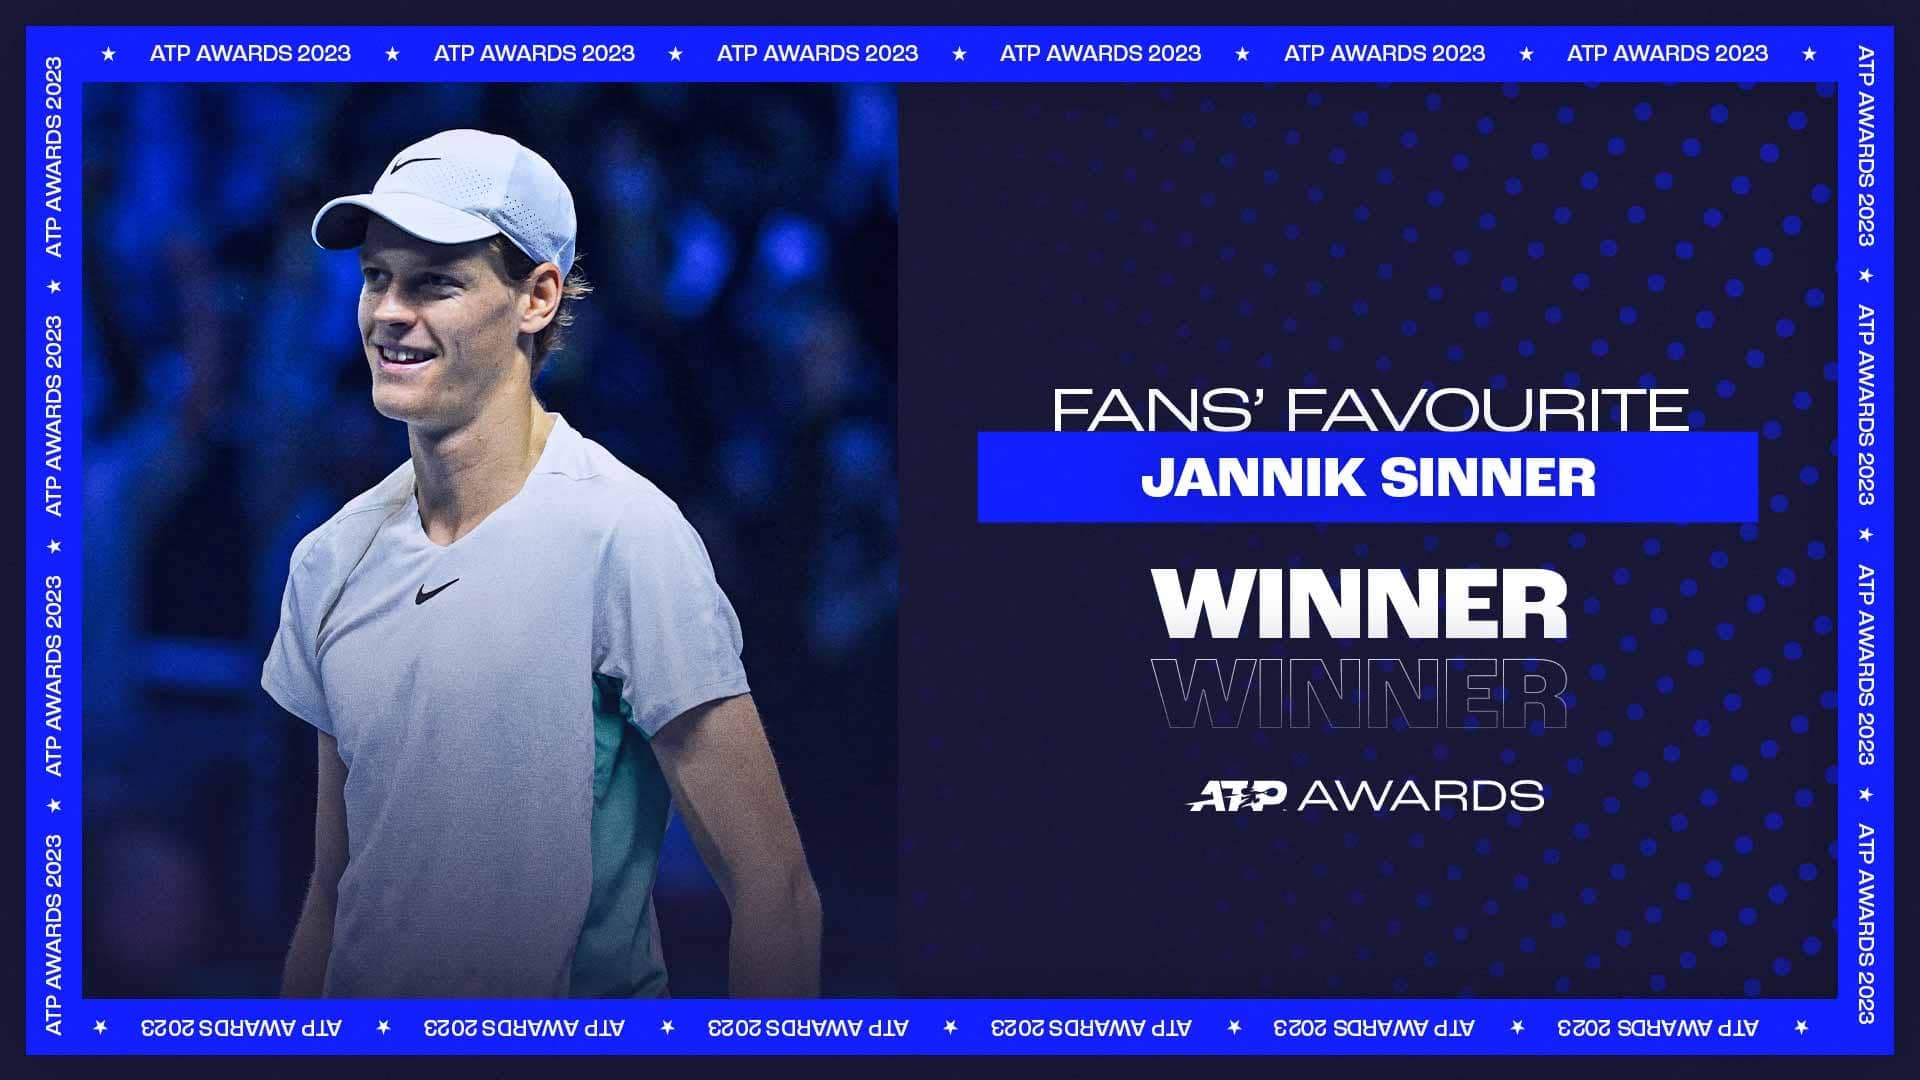 "This Award Means A Lot To Me": Sinner Voted Fans' Favourite In 2023 ATP Awards